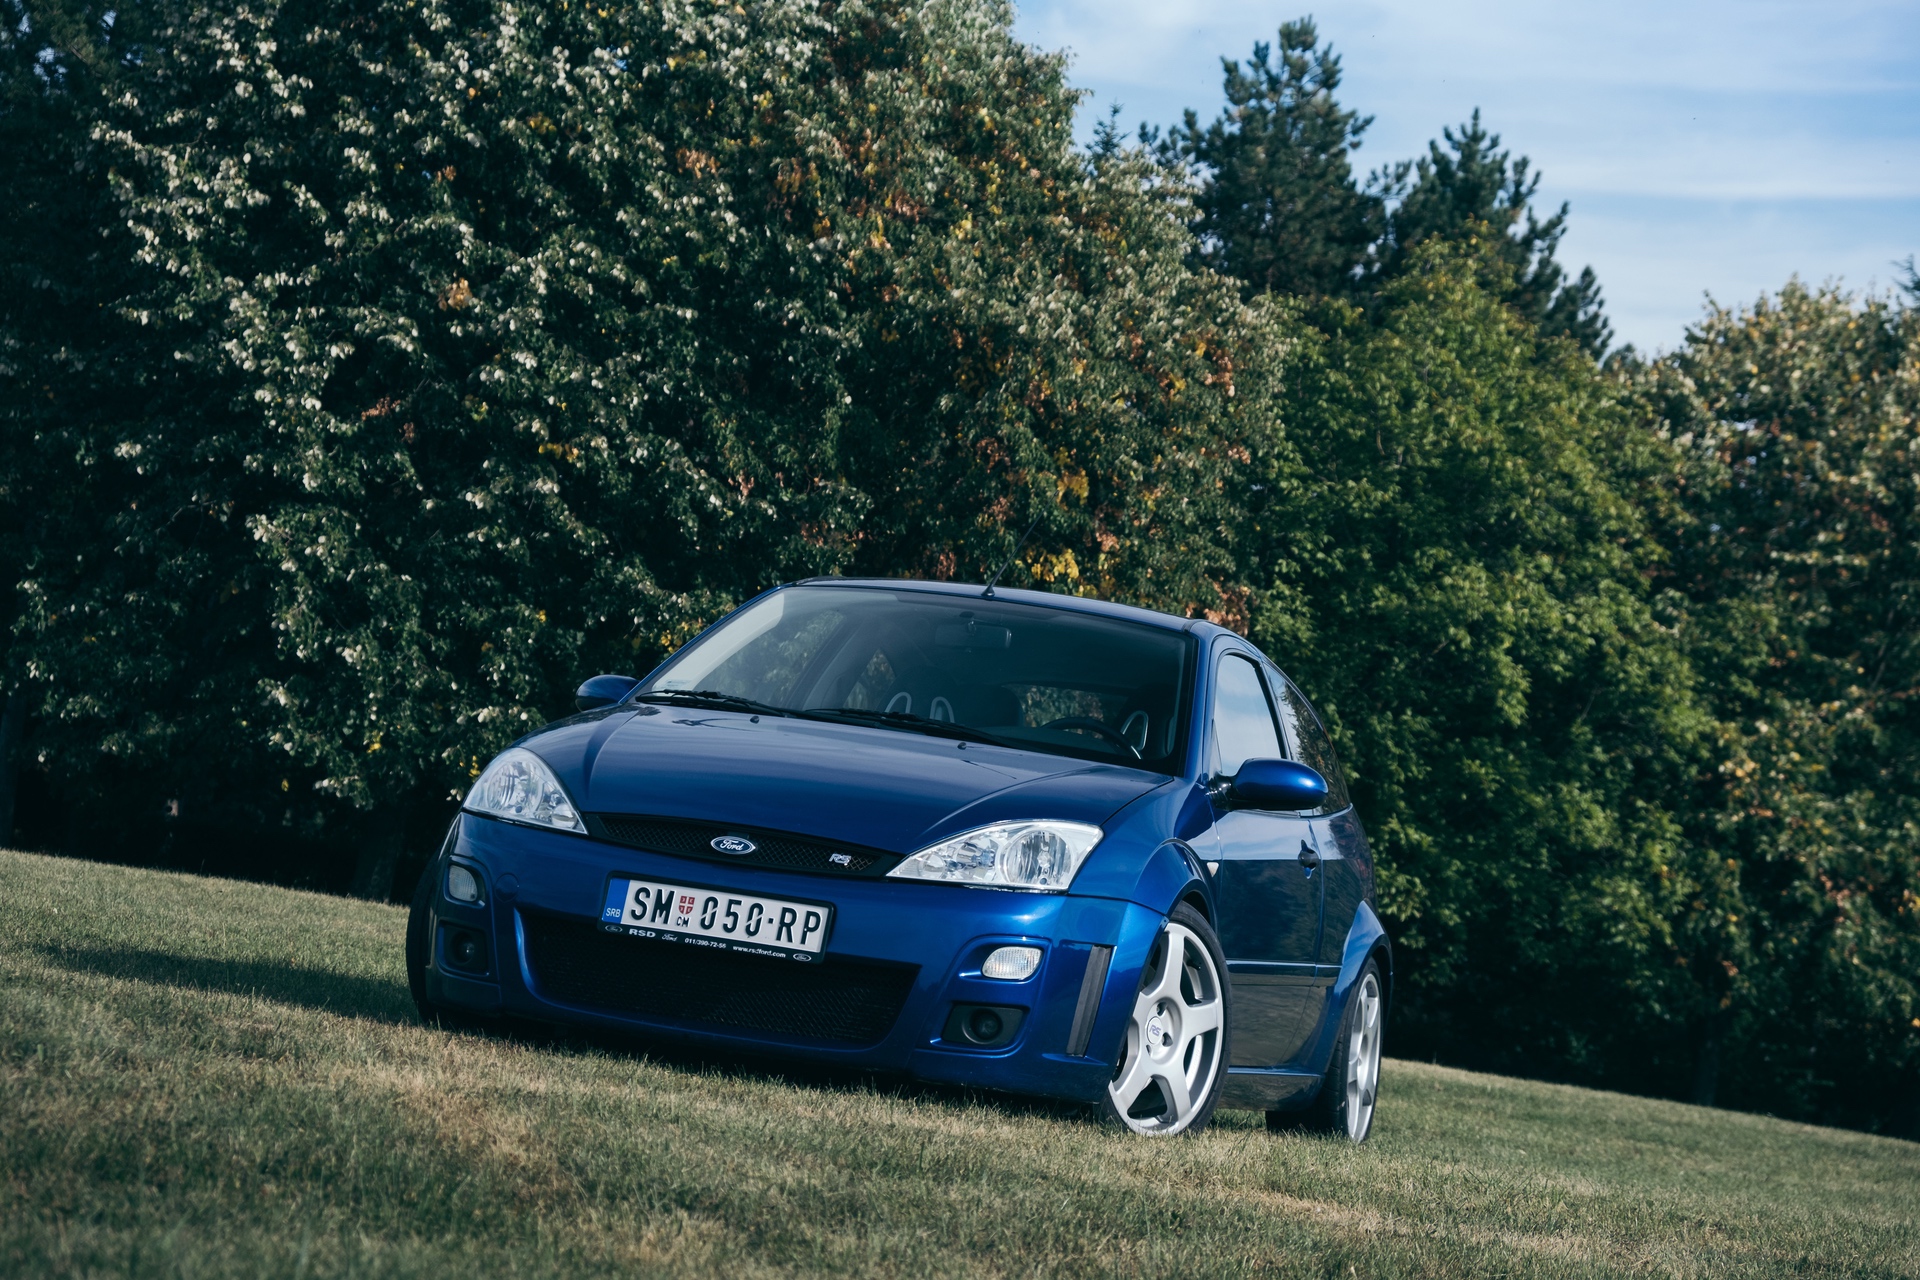 Front view of blue Ford Focus RS parked in grassy field